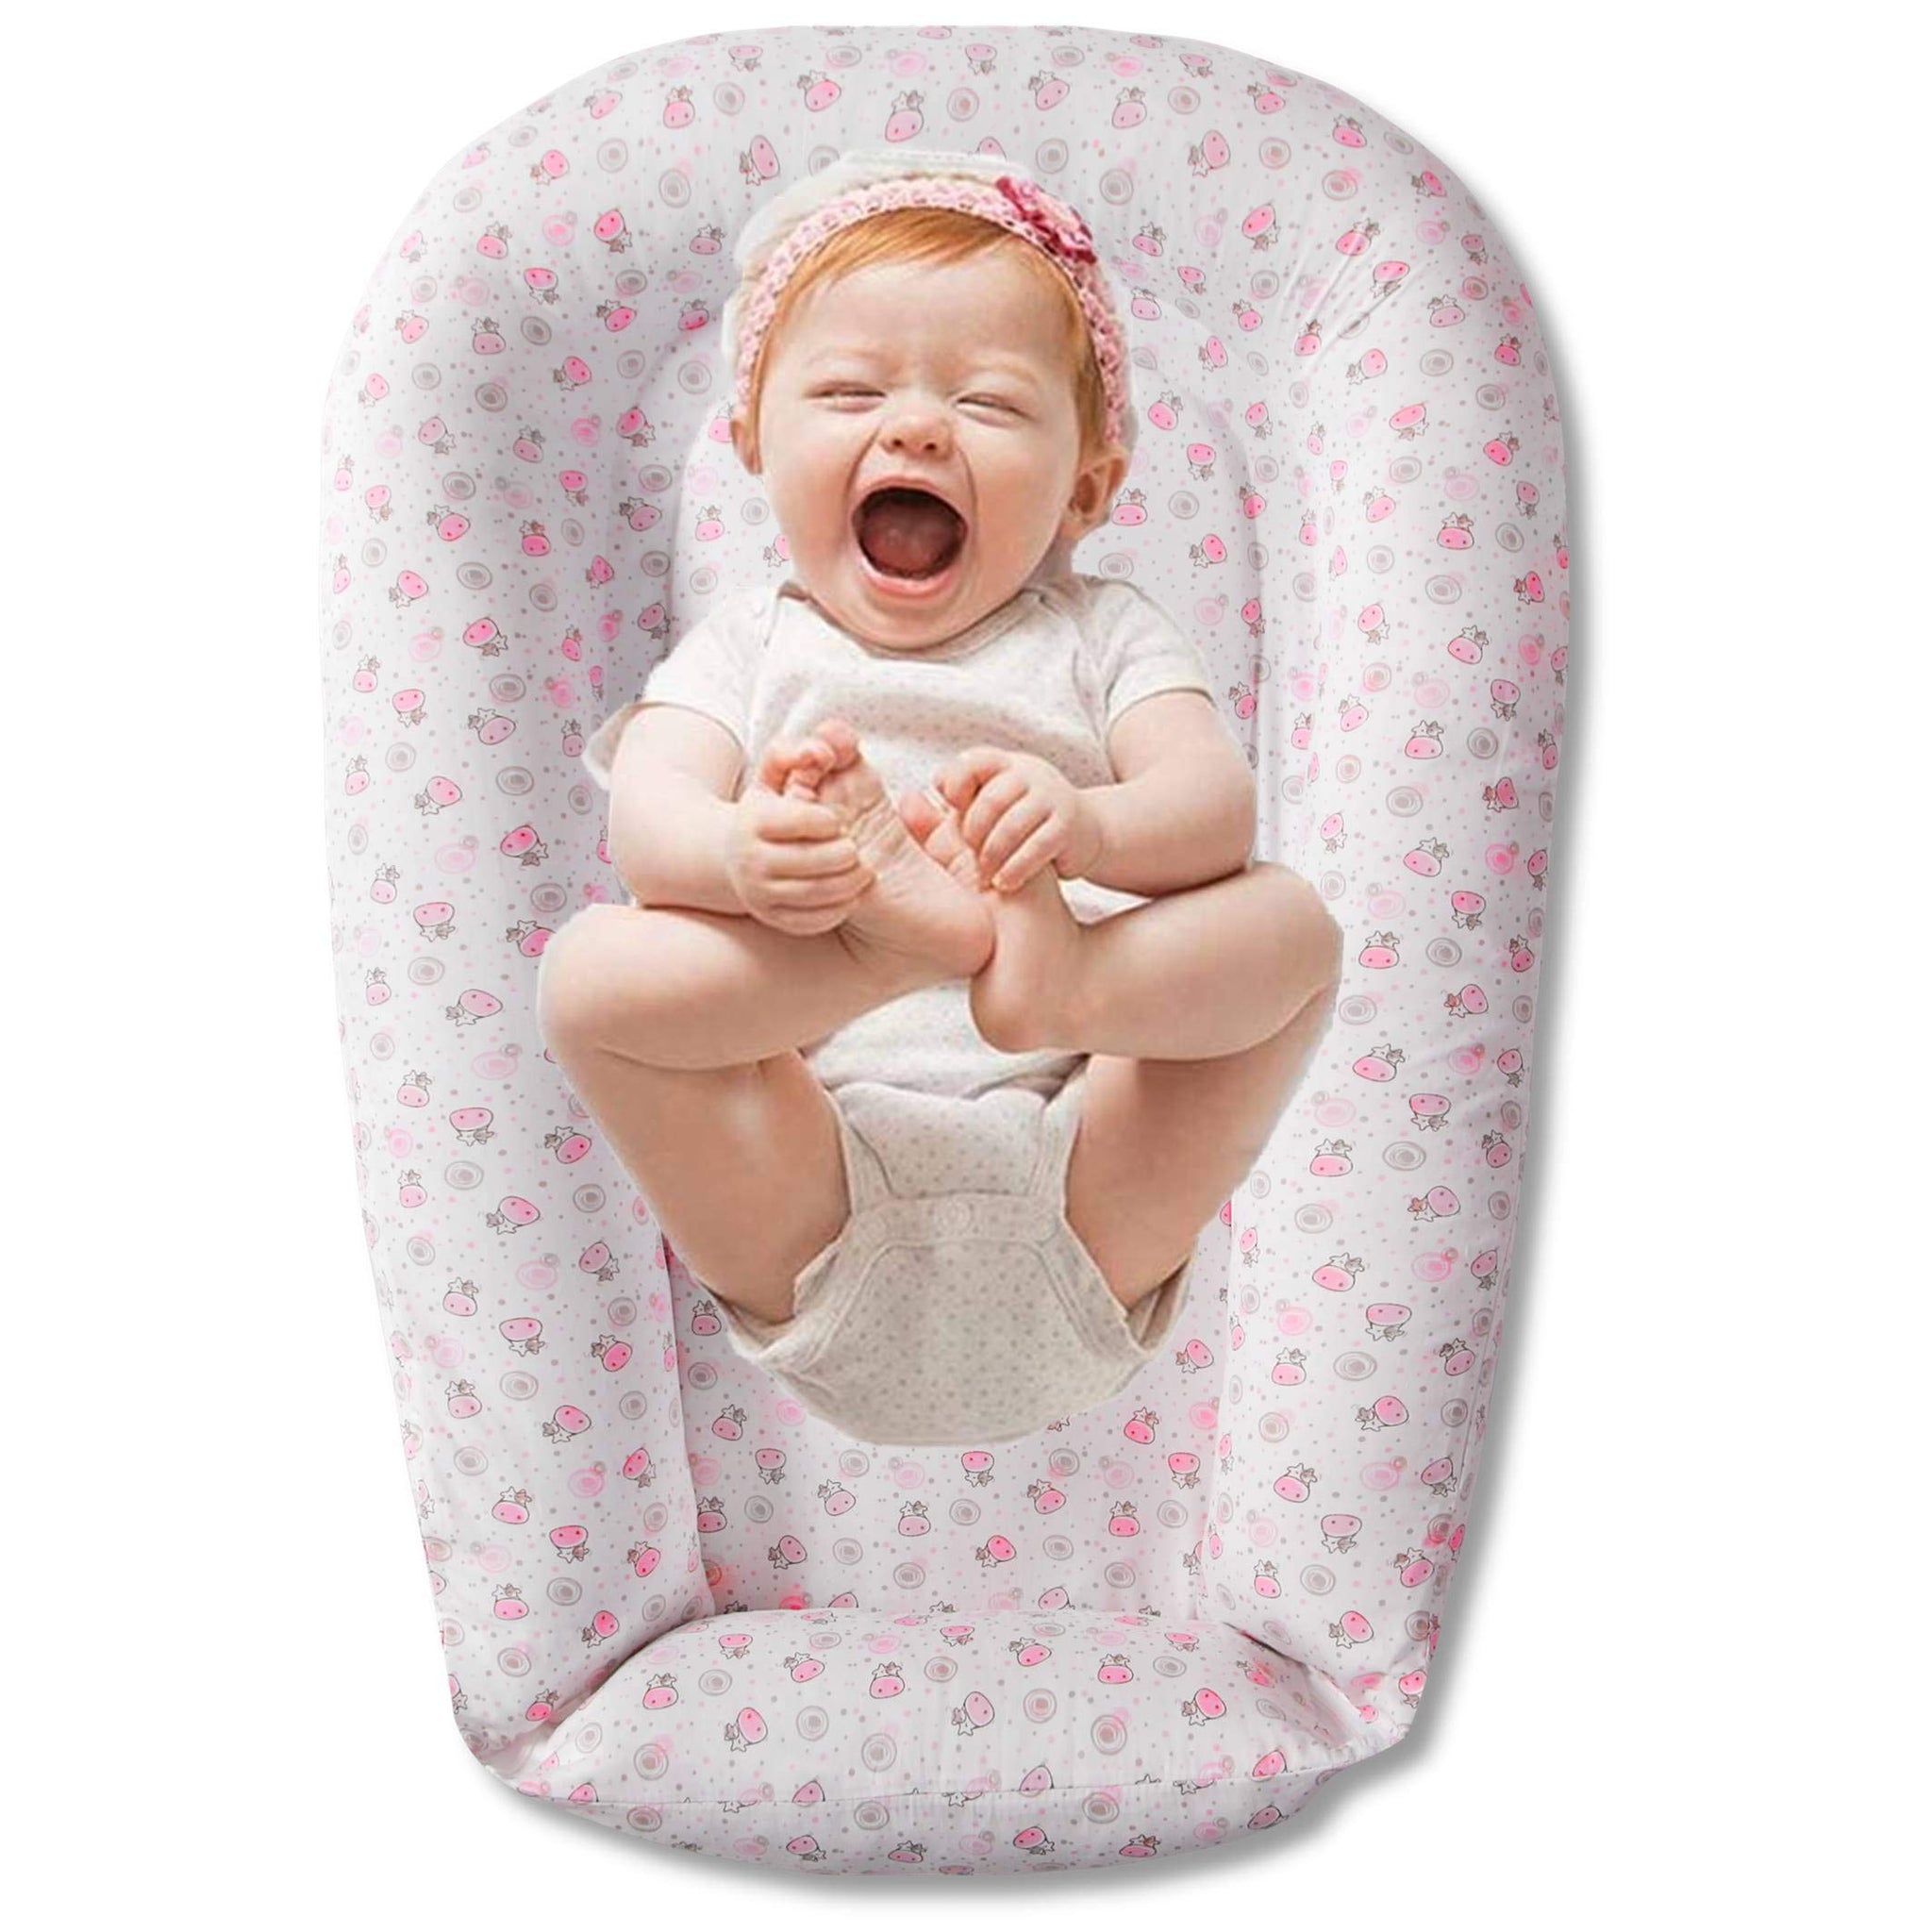 Via Trading  New Overstock Manfested Baby Loungers